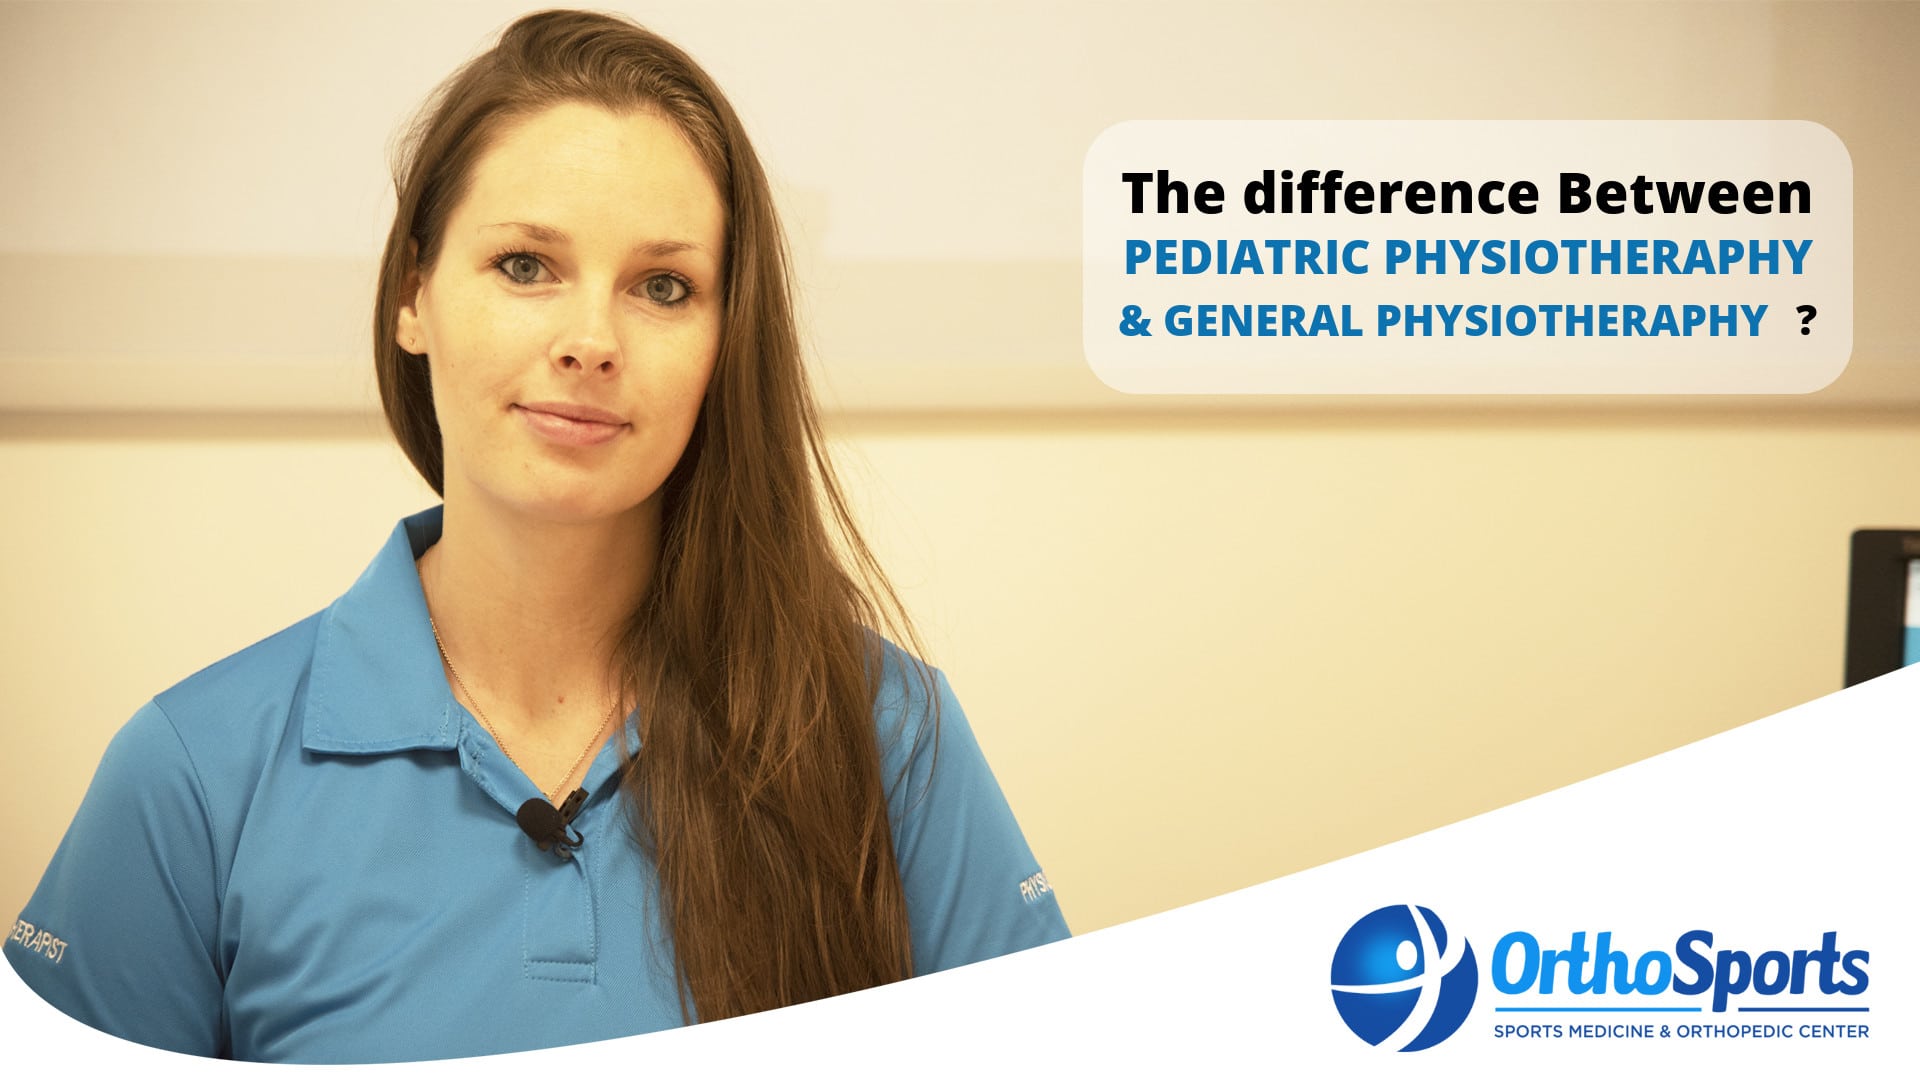 General & Pediatric Physiotherapy